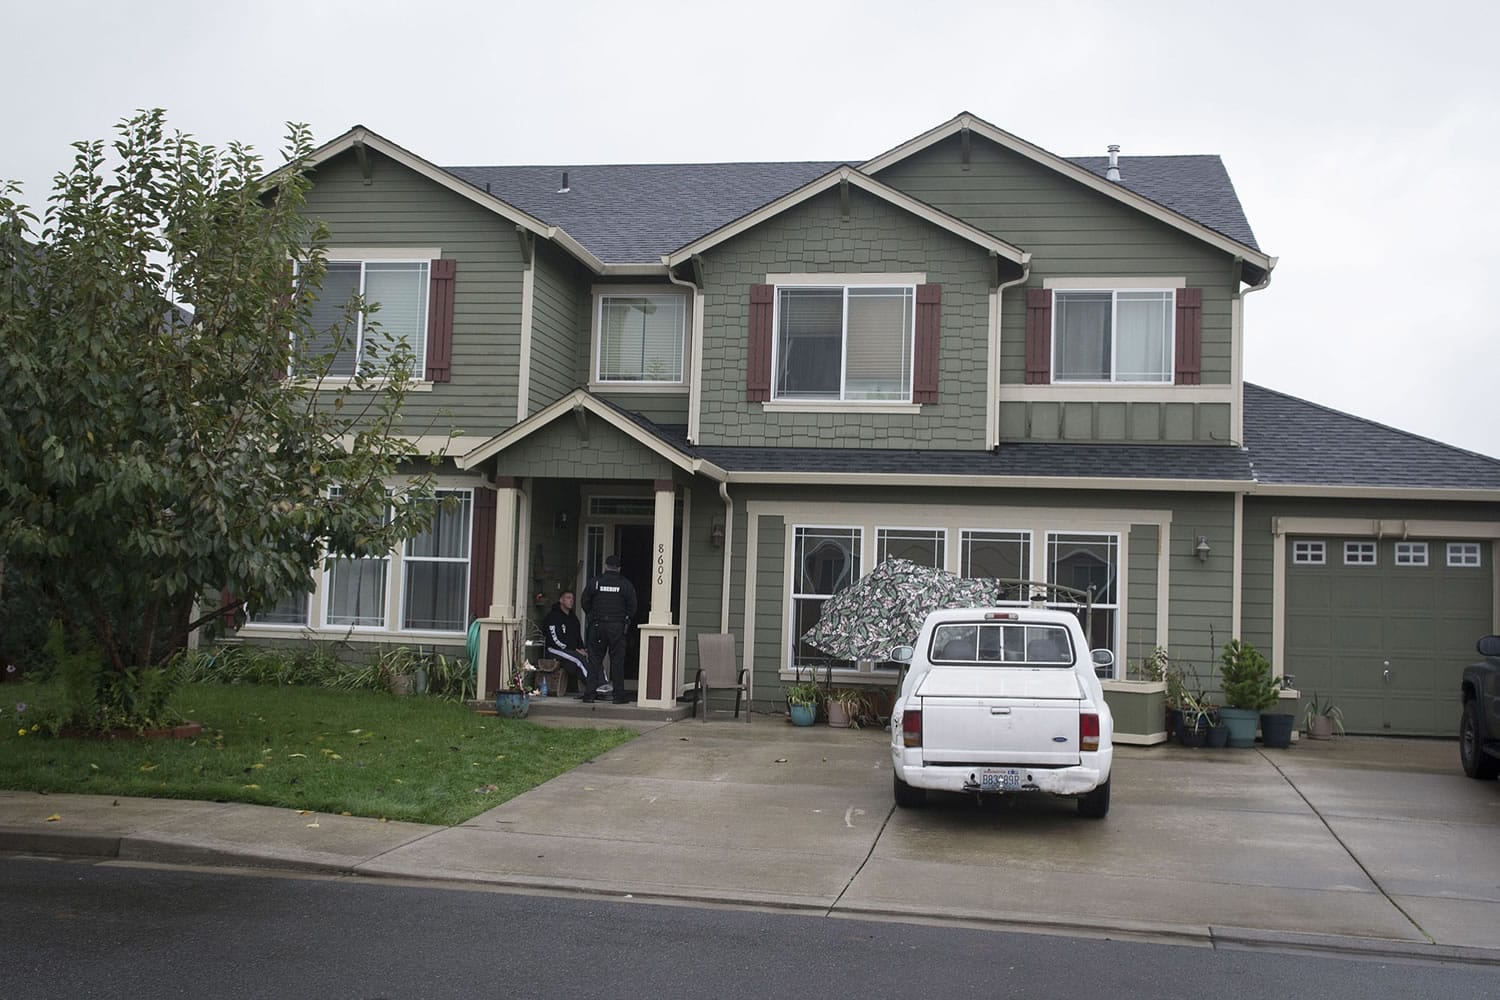 Gunman John Kendall lived at 8606 N.E. 64th St in Vancouver.